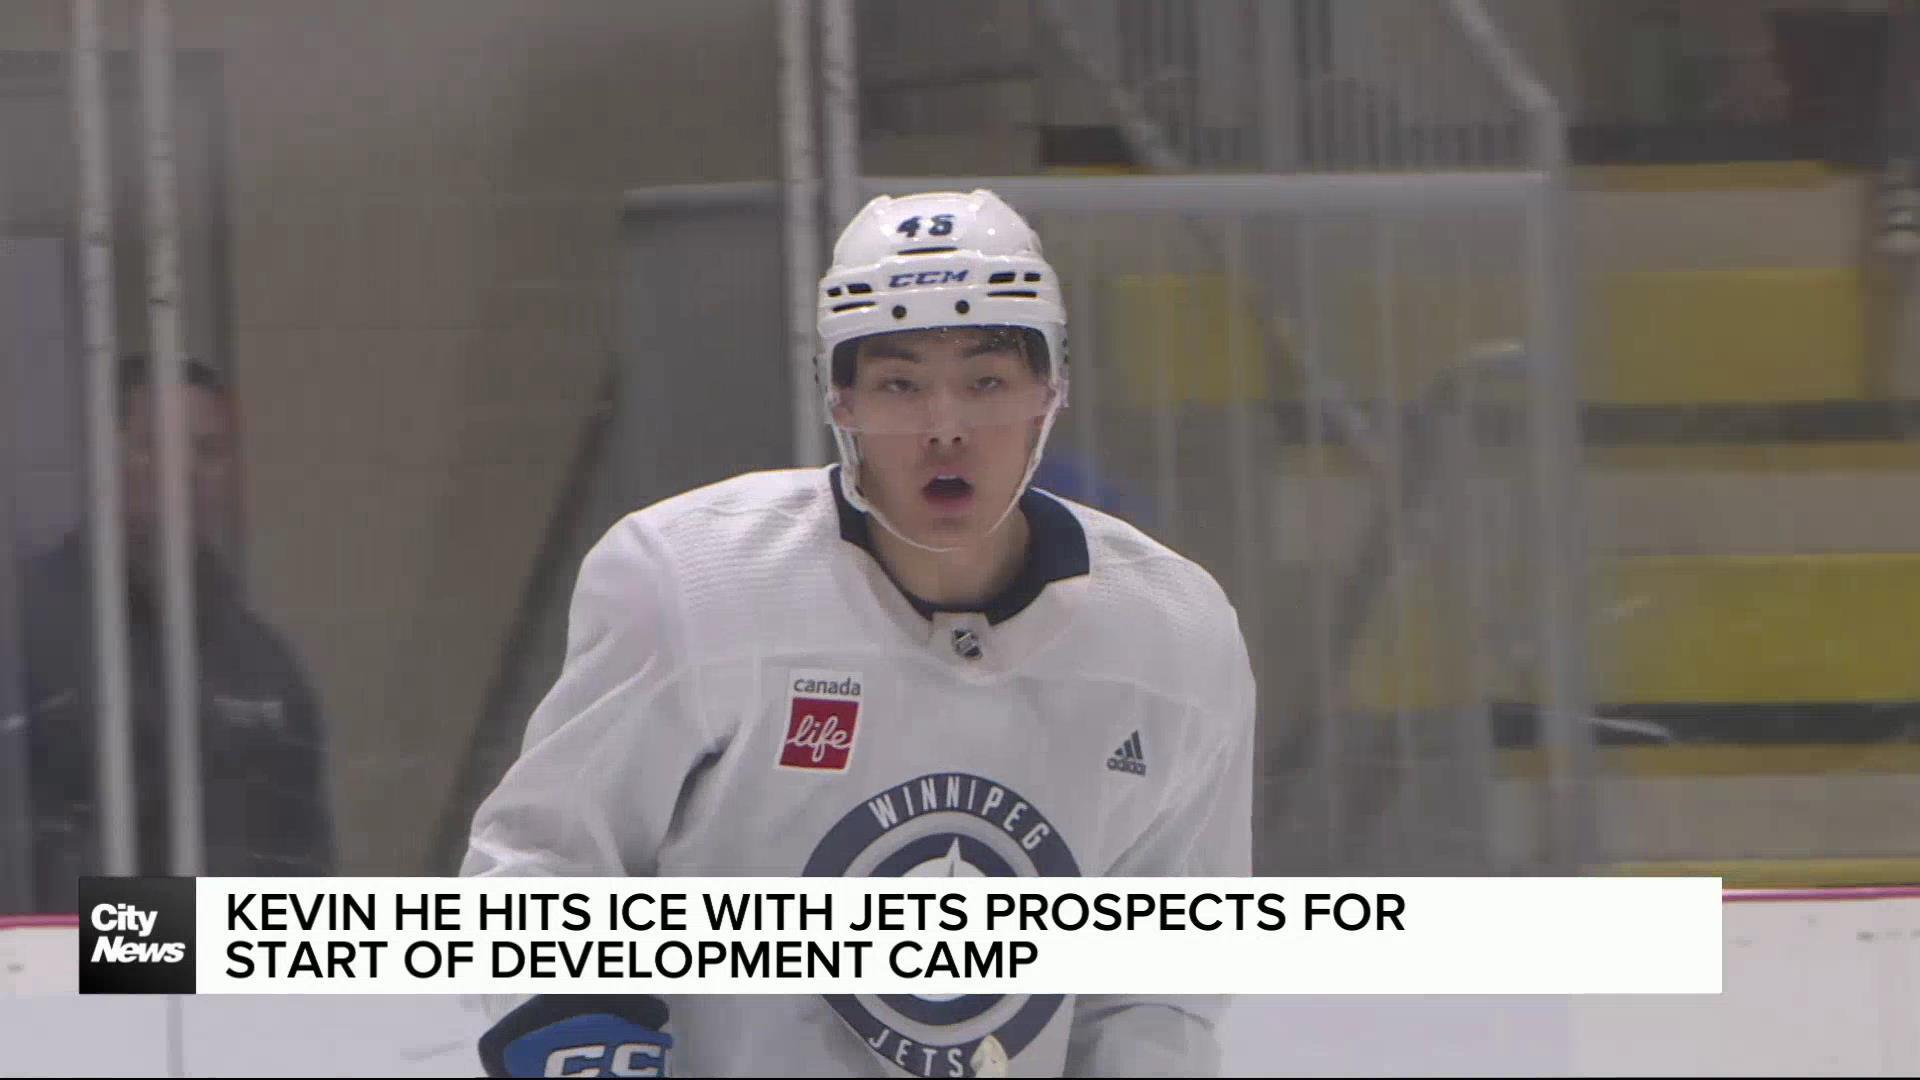 NHL hopefuls hit the ice for the start of Jets development camp